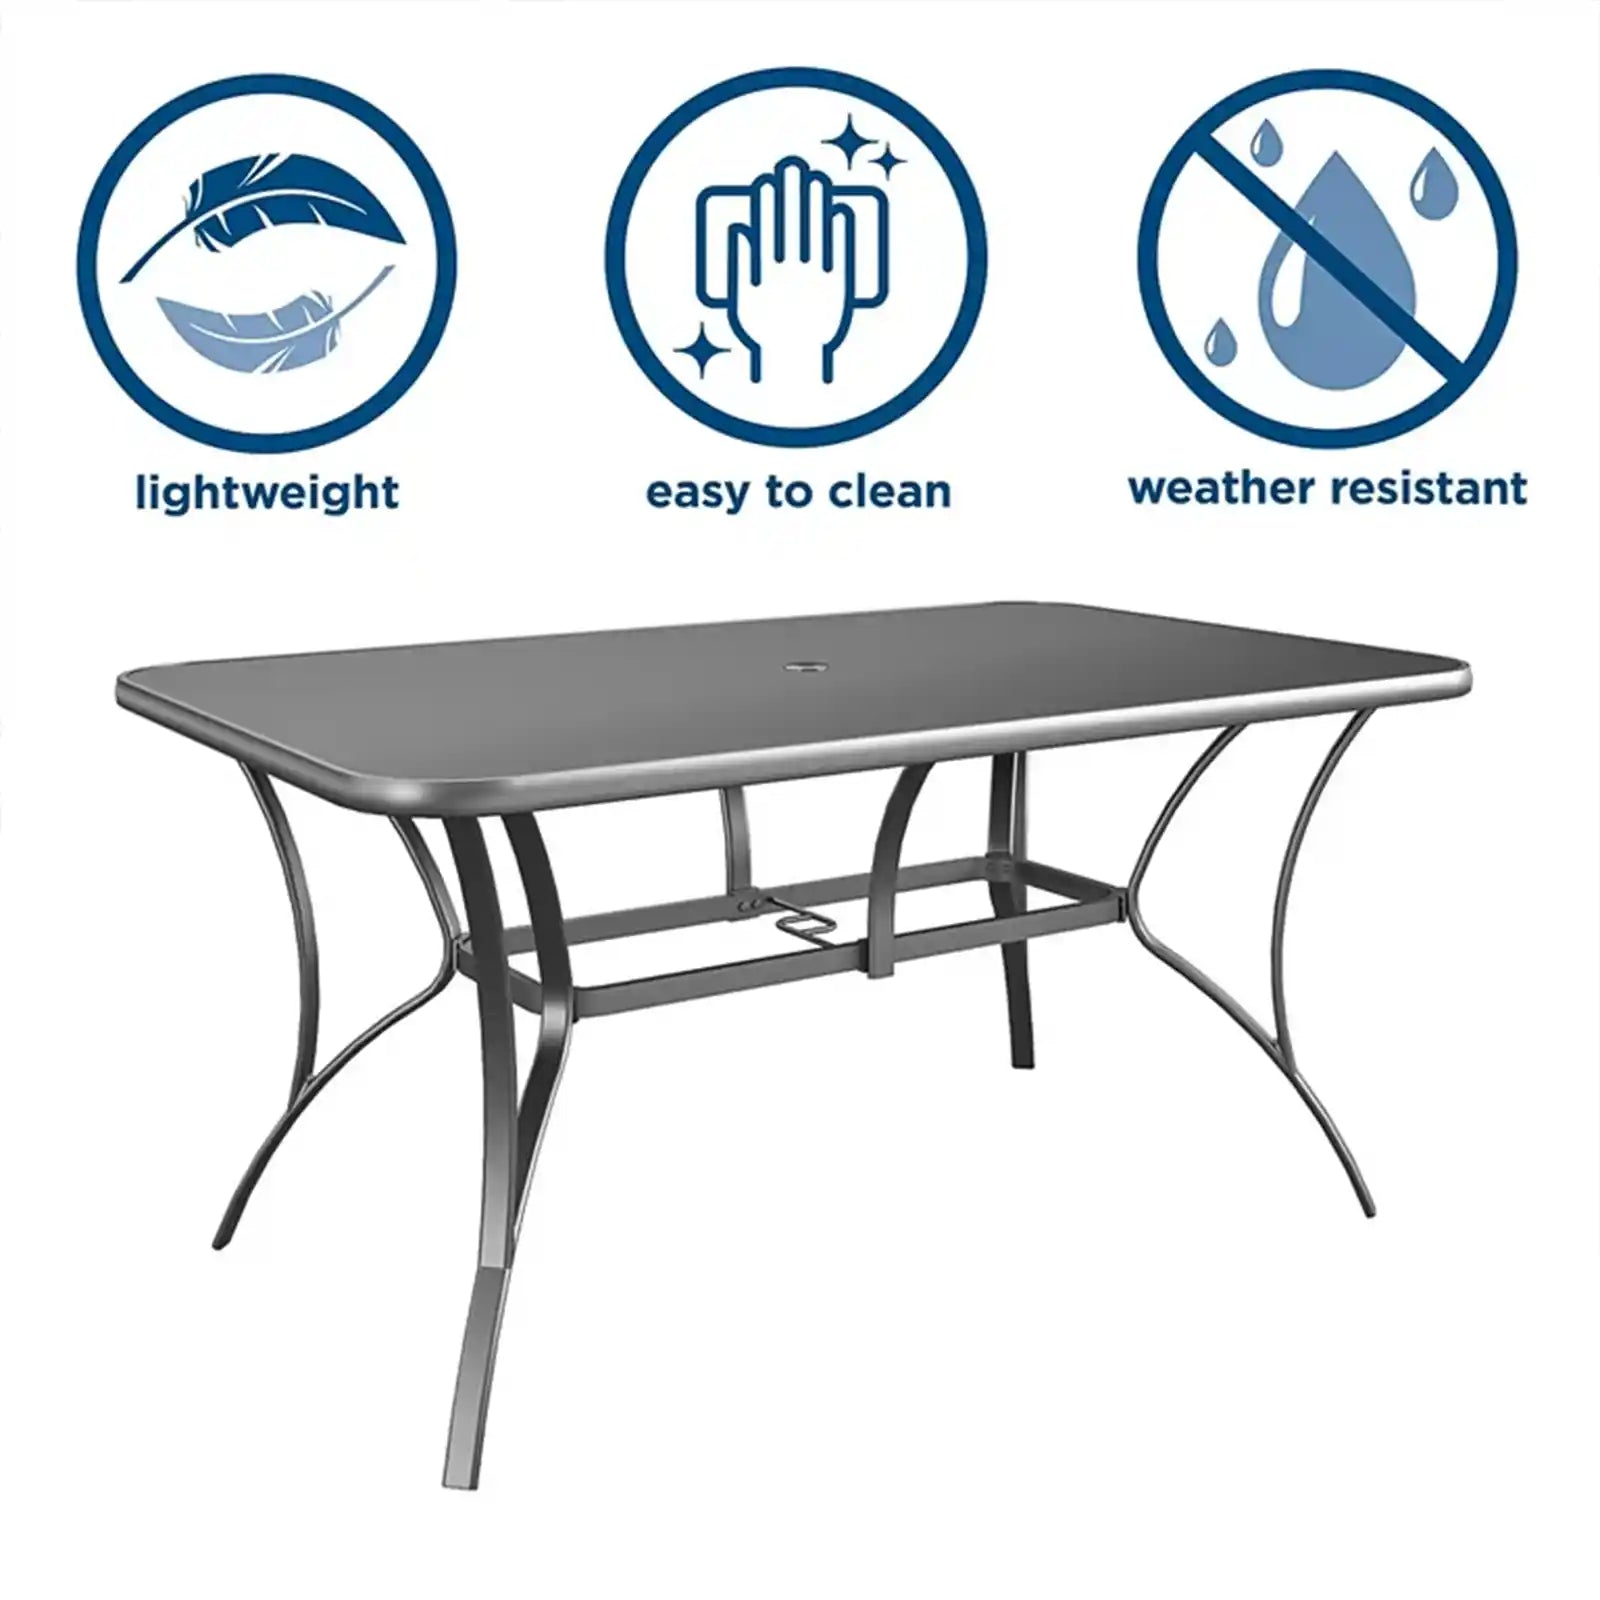 Outdoor Rectangular Dining Table, Tempered Glass Outdoor Tables